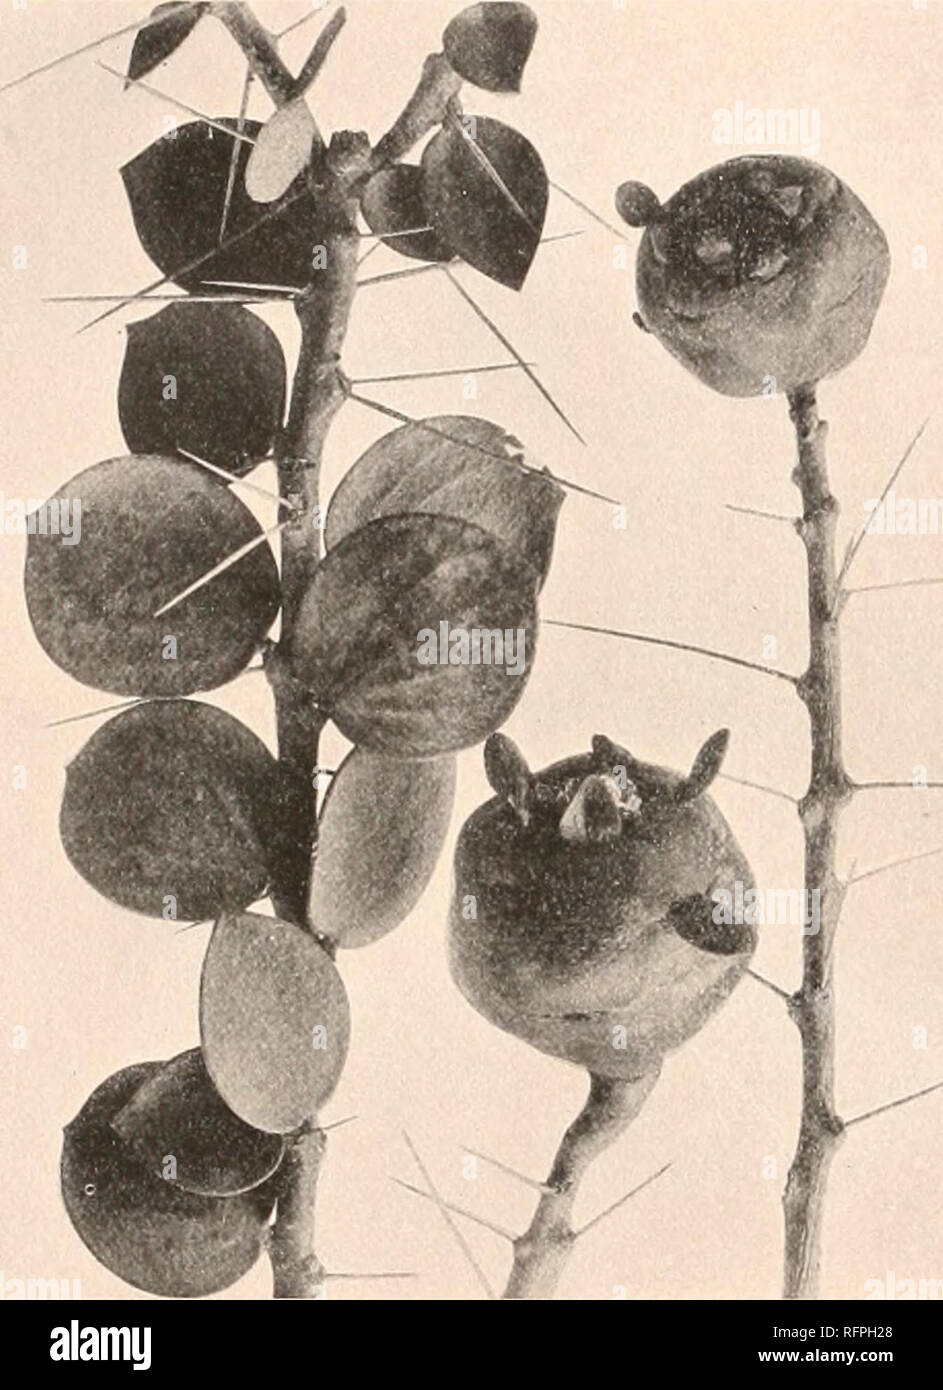 . Carnegie Institution of Washington publication. 12 THE CACTACEAE. cherry-brown, smooth; spines in the axils of the leaves usually solitary, sometimes in threes, long and slender, 3 to 4 cm., rarely 16 cm. long; leaves thickish, oblong to orbicular, 4 to 8 cm. long, rounded or somewhat narrowed at base, mucronately tipped; flowers solitary, near the tops of the branches, short-peduncled; ovary covered with leafy scales; flowers 4 to 5 cm. broad; petals entire, orange- colored; stamens numerous; fruit globular, 4 to 5 cm. in diameter, fleshy, glabrous, bearing small, scattered leaves, these na Stock Photo